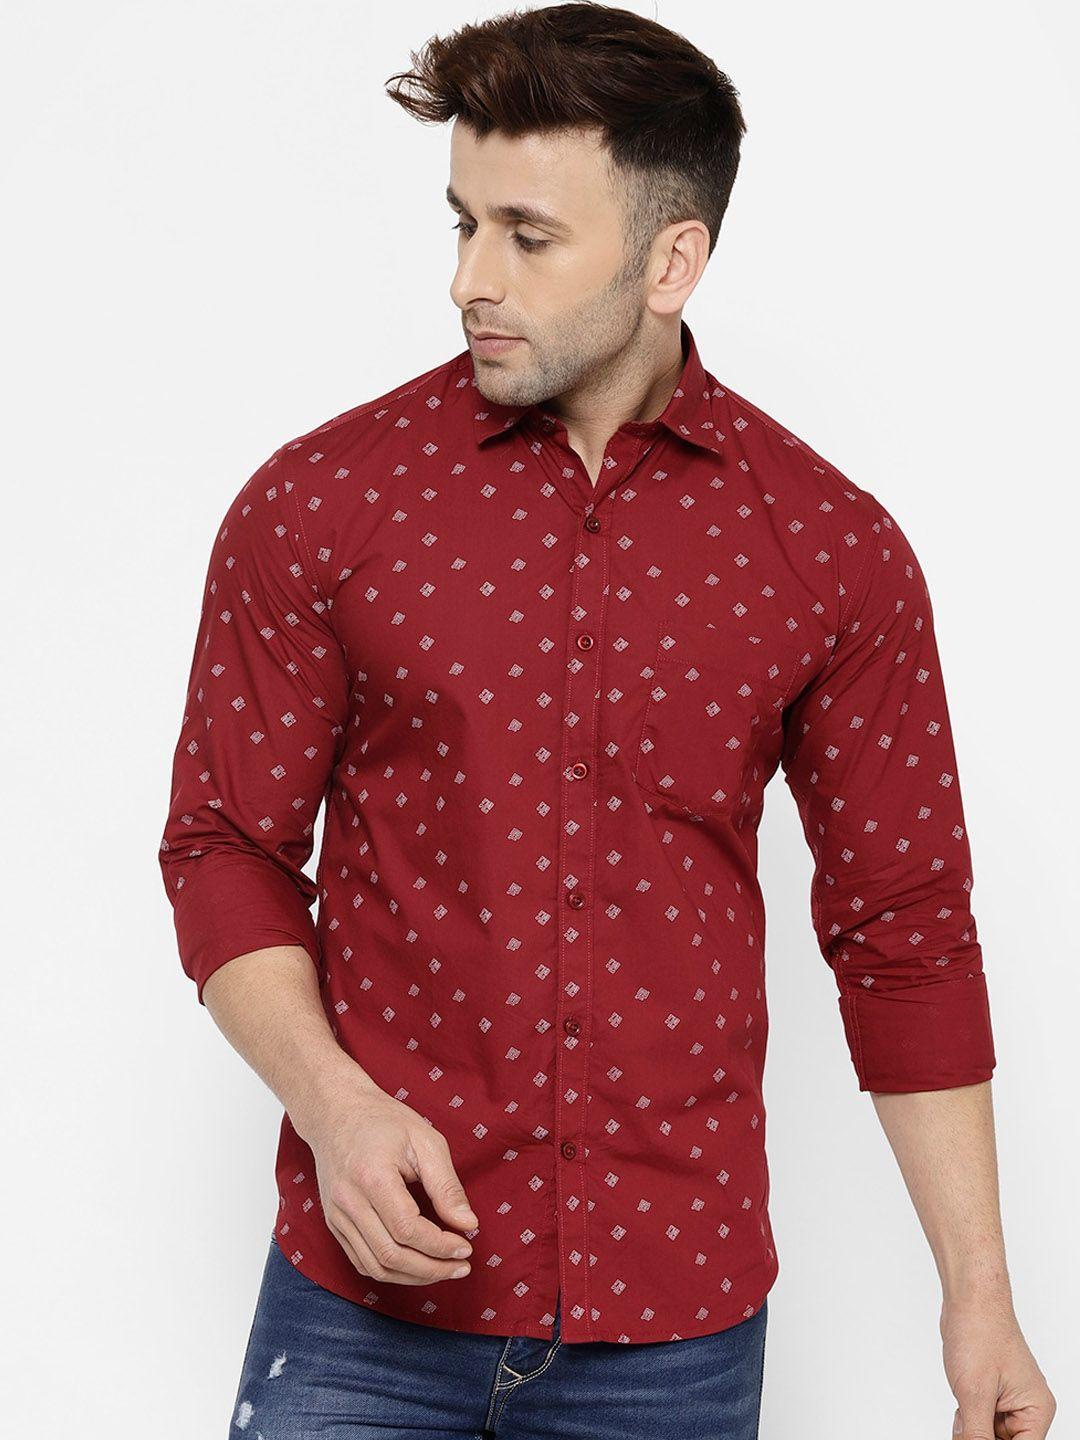 cape-canary-men-red-regular-fit-printed-casual-shirt